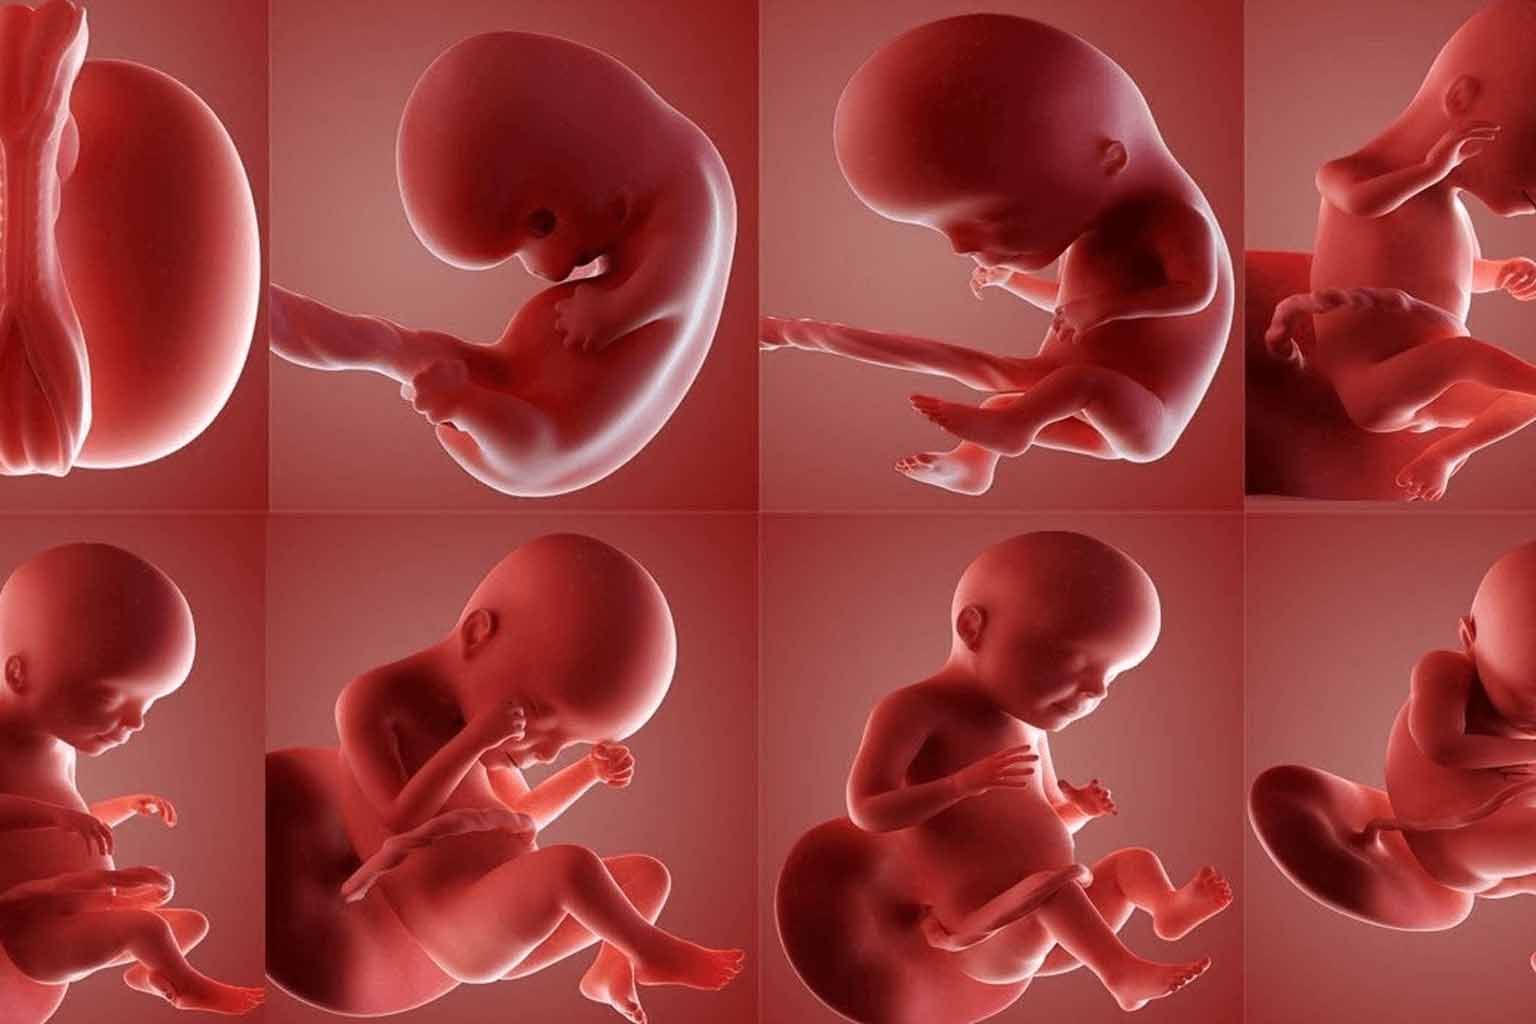 signs in baby growth in womb